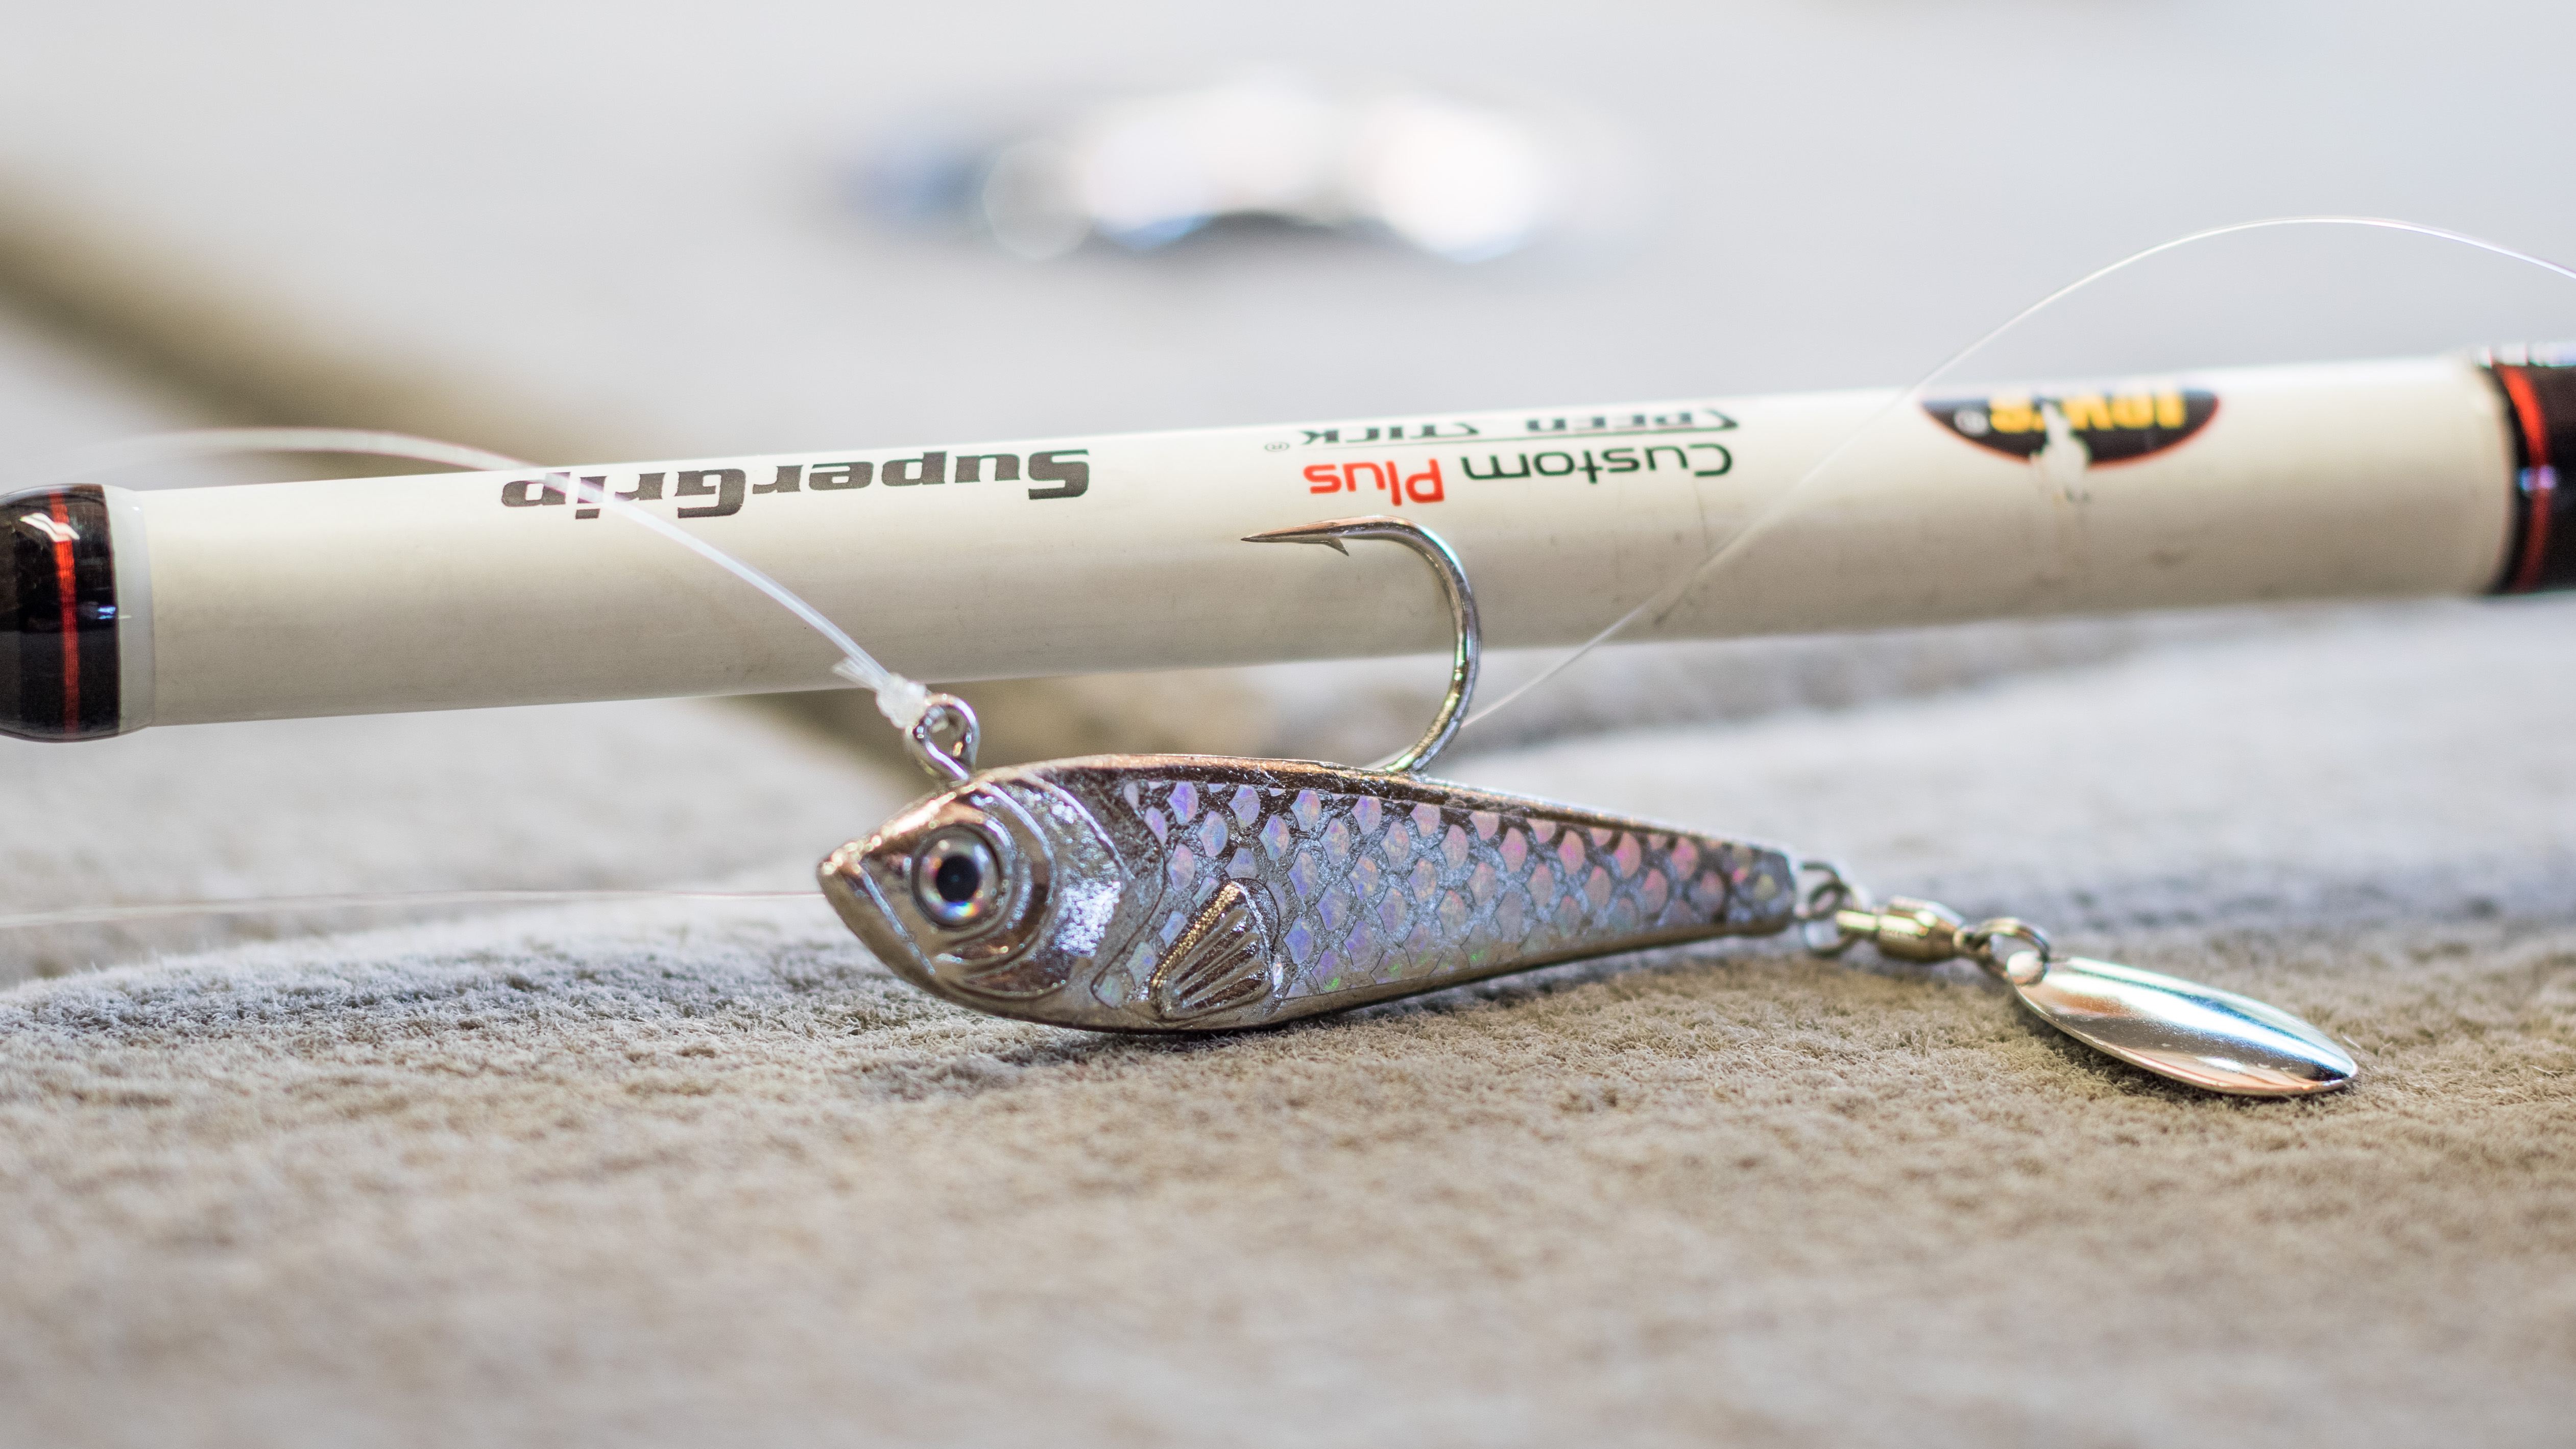 Review: Blade Runner Turbo Tail - Major League Fishing